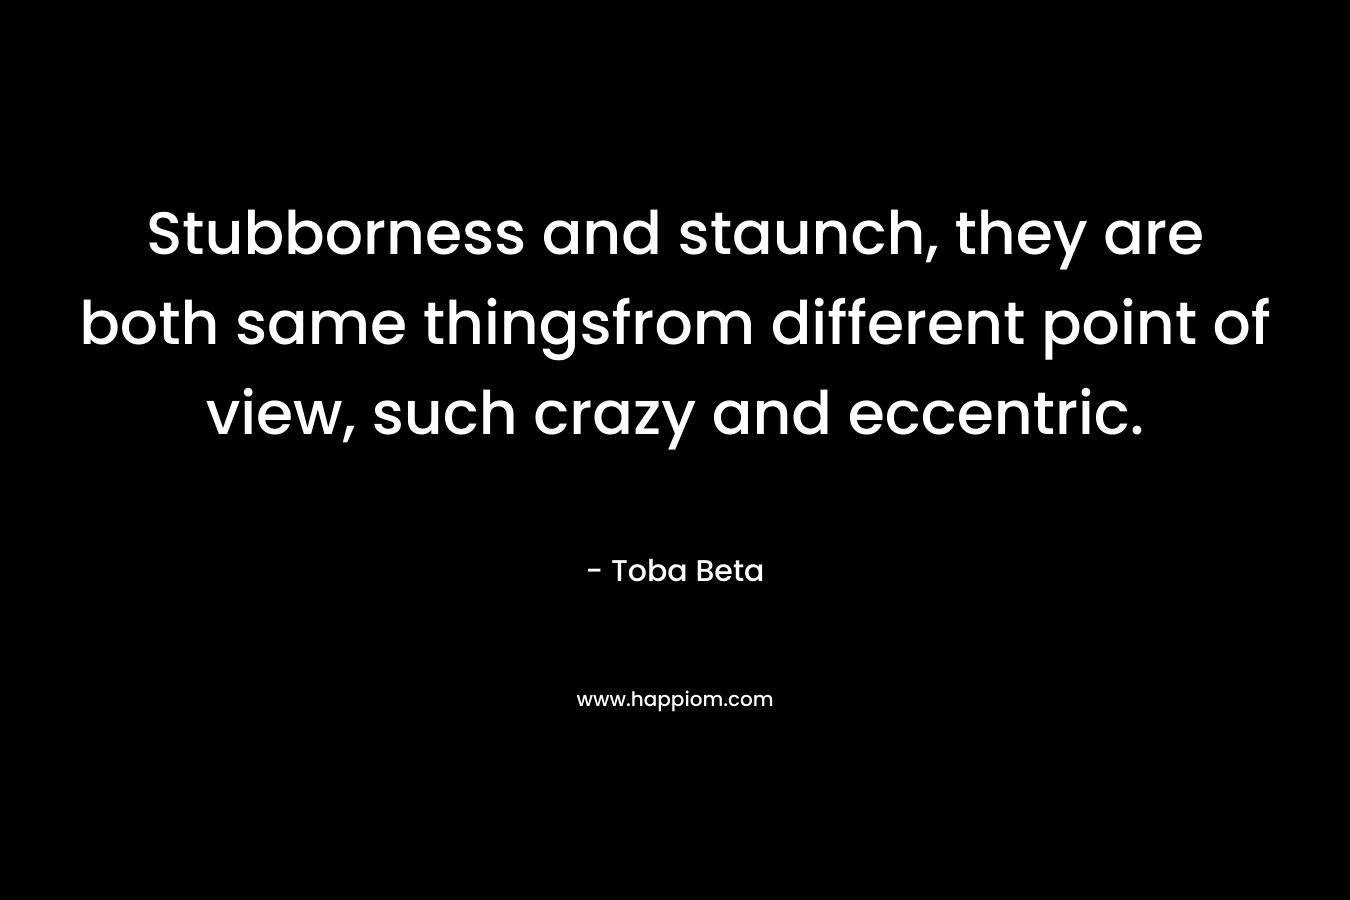 Stubborness and staunch, they are both same thingsfrom different point of view, such crazy and eccentric. – Toba Beta